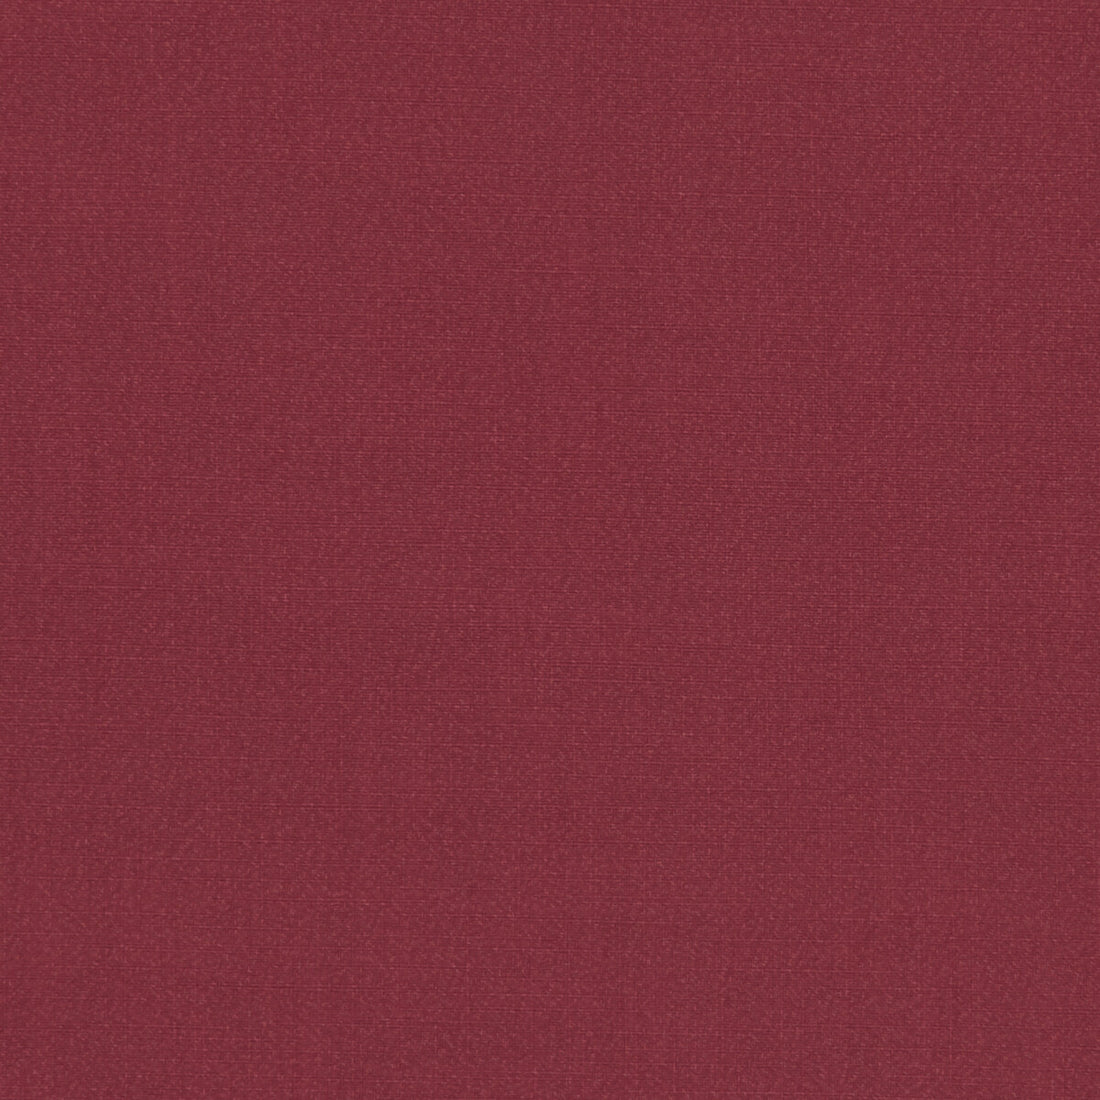 Hudson fabric in cranberry color - pattern F1076/06.CAC.0 - by Clarke And Clarke in the Clarke &amp; Clarke Hudson collection